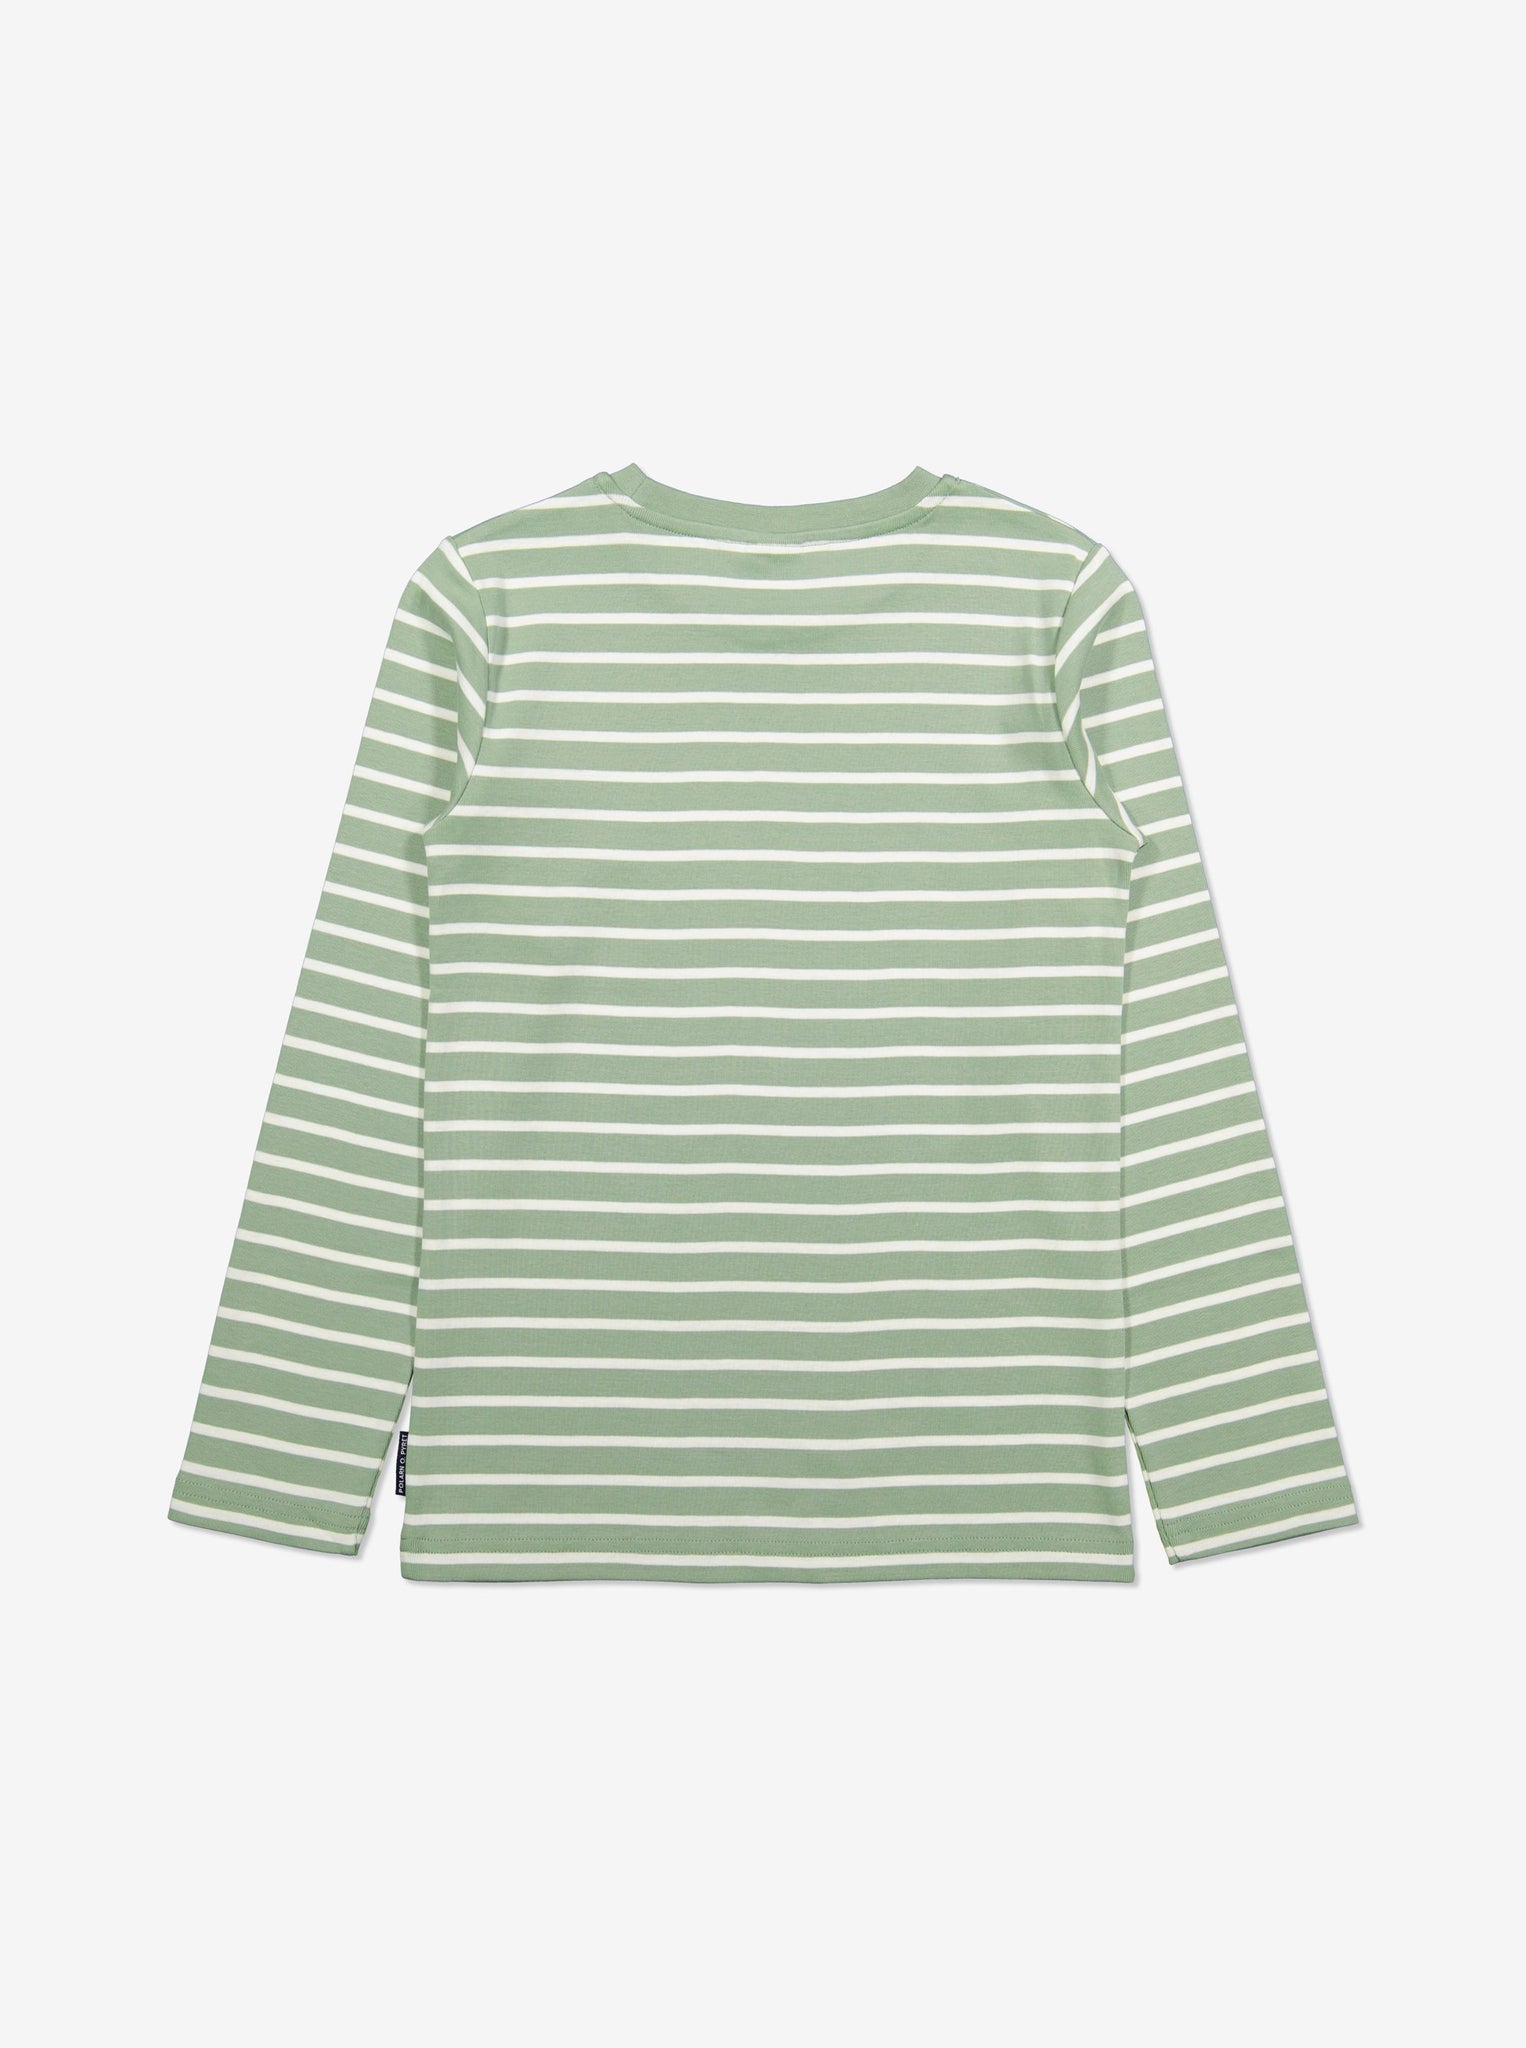  Organic Striped Green Kids Top from Polarn O. Pyret Kidswear. Made with 100% organic cotton.